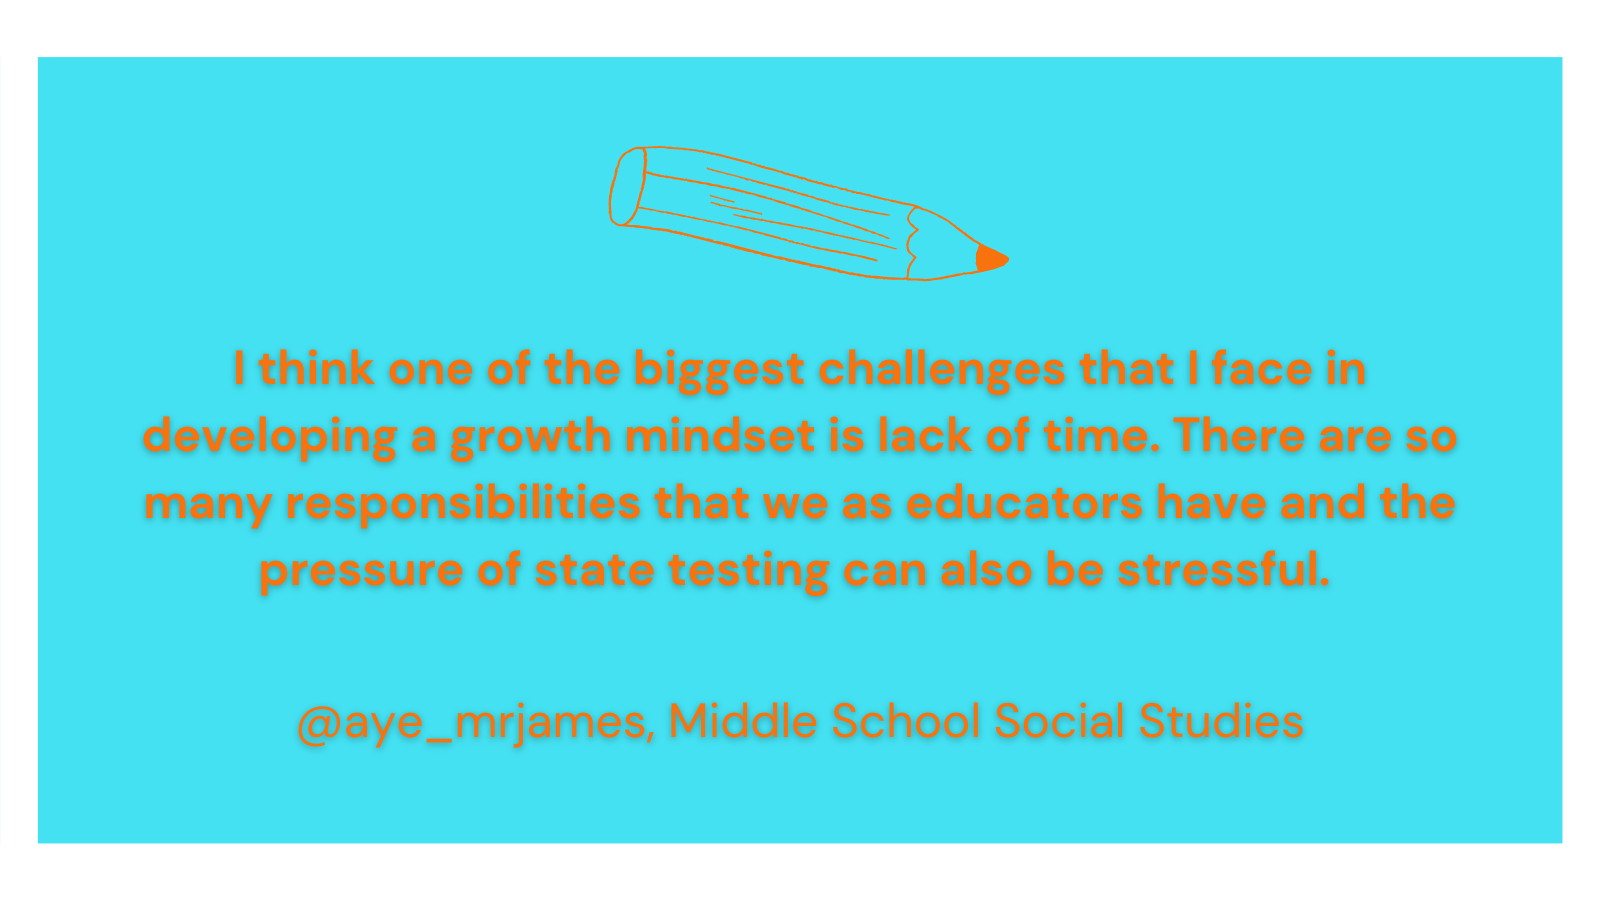 Pencil graphic with a quote from the Growth Mindset Twitter chat